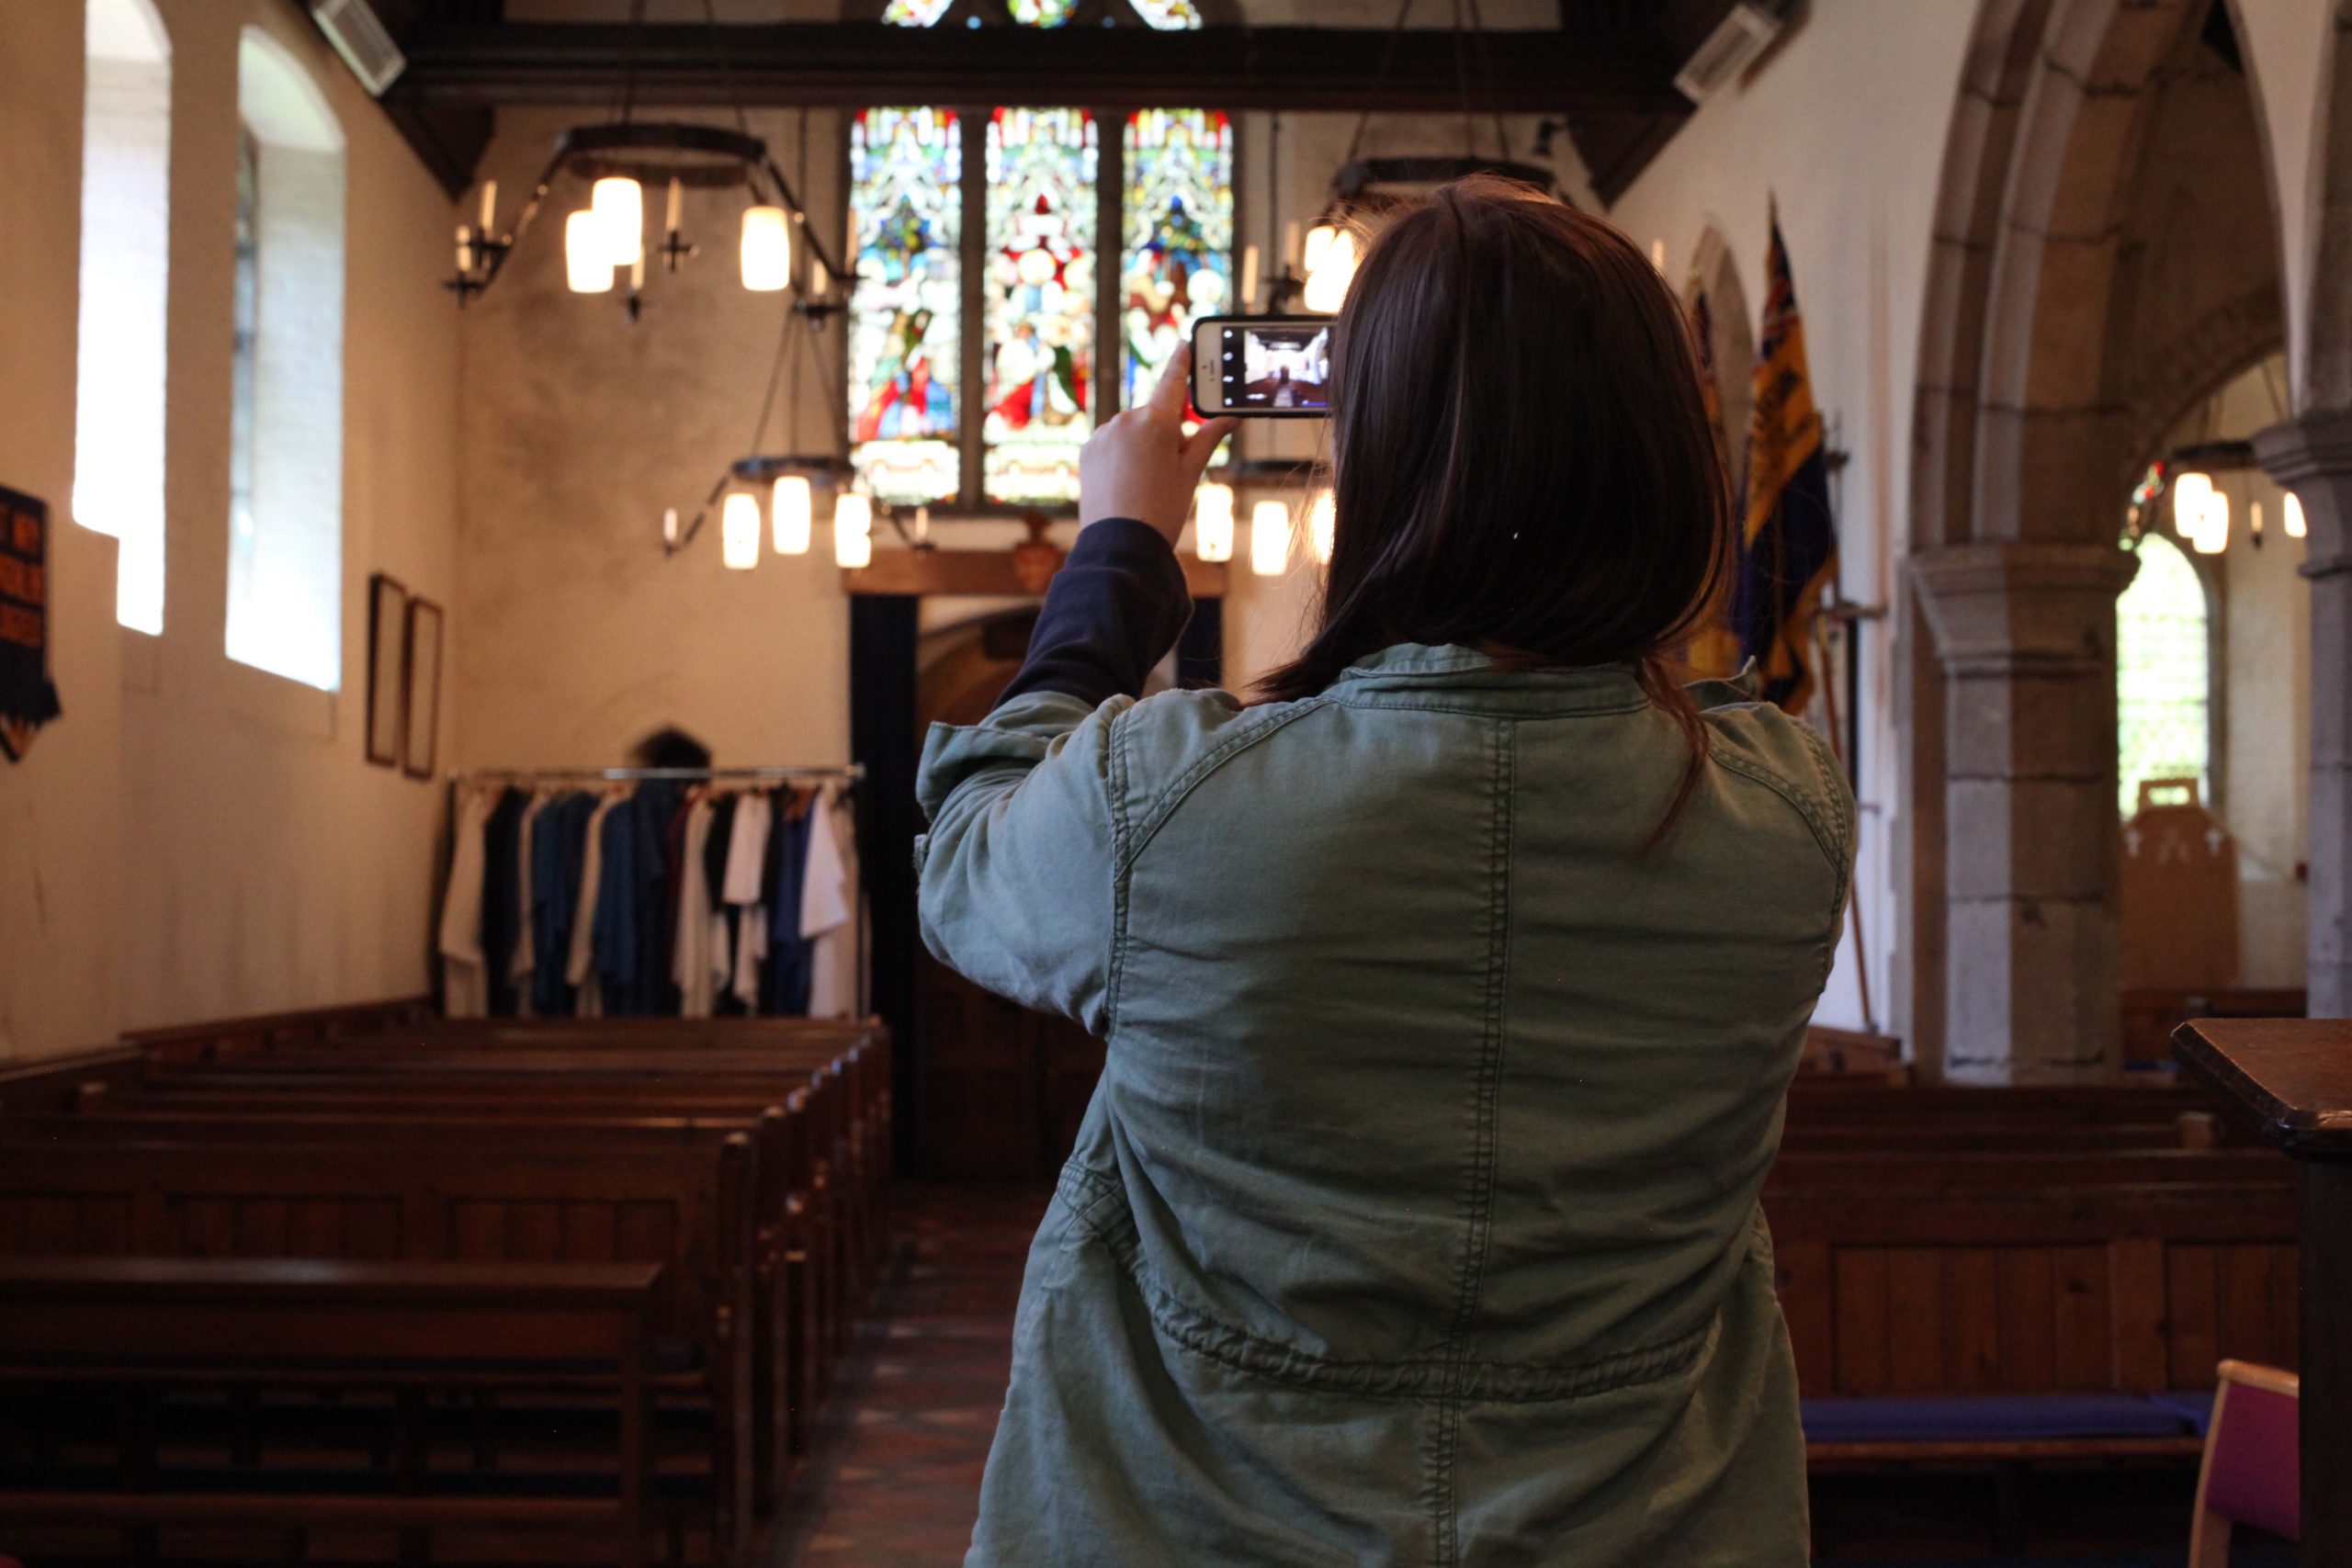 Claire demonstrating how to photograph the interior of a church with a mobile phone